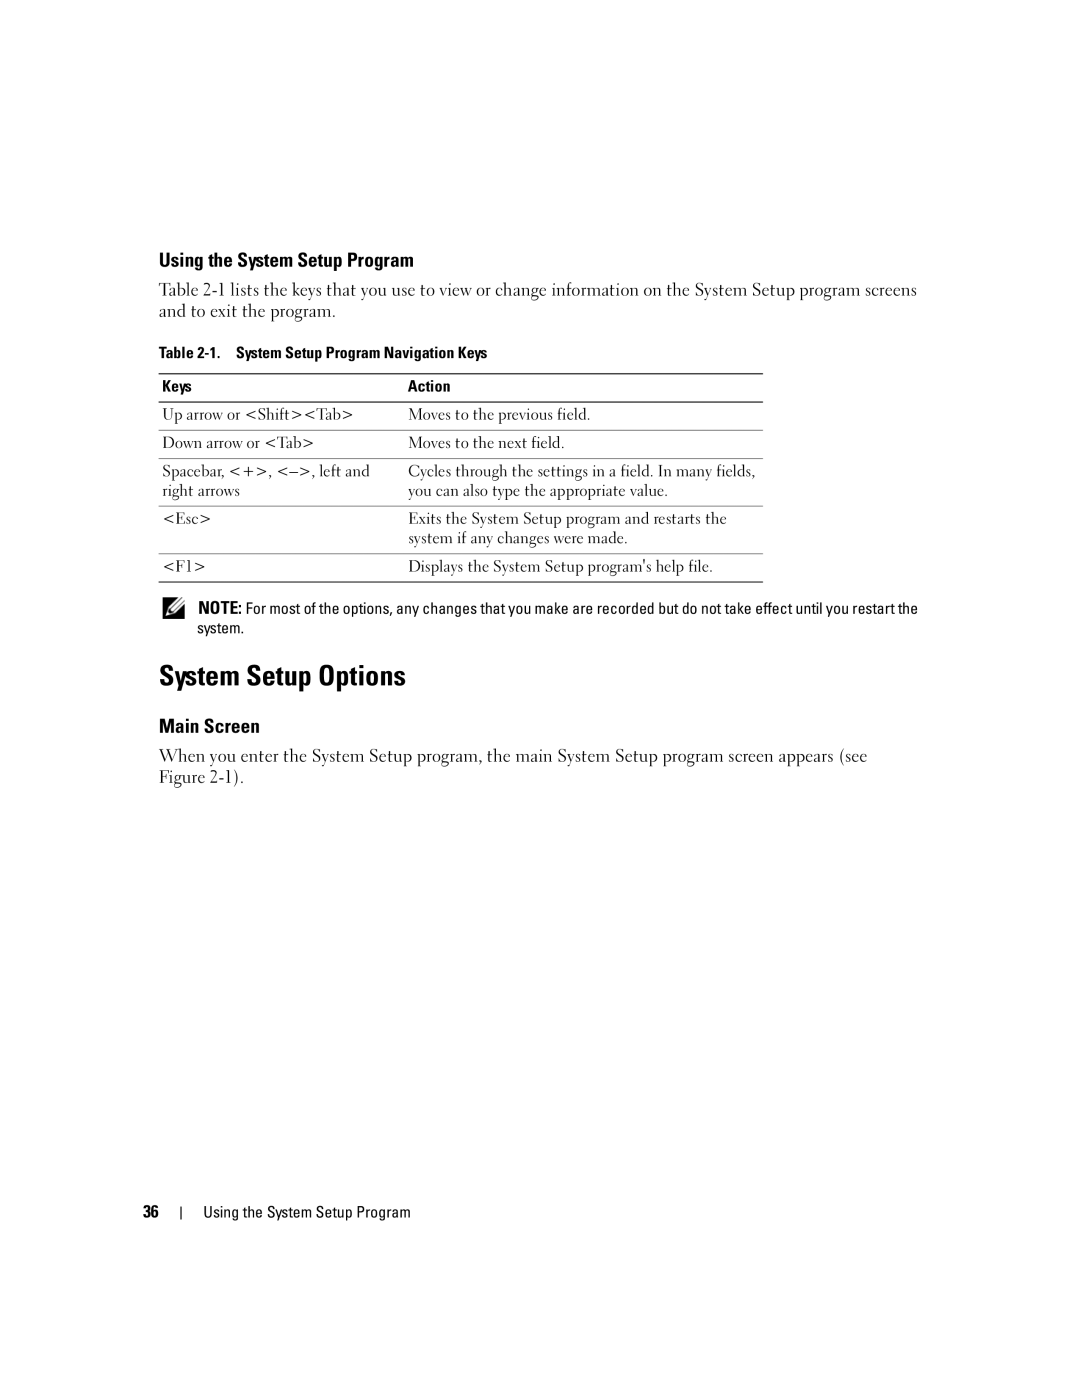 Dell 2900 owner manual System Setup Options, Using the System Setup Program, Main Screen 